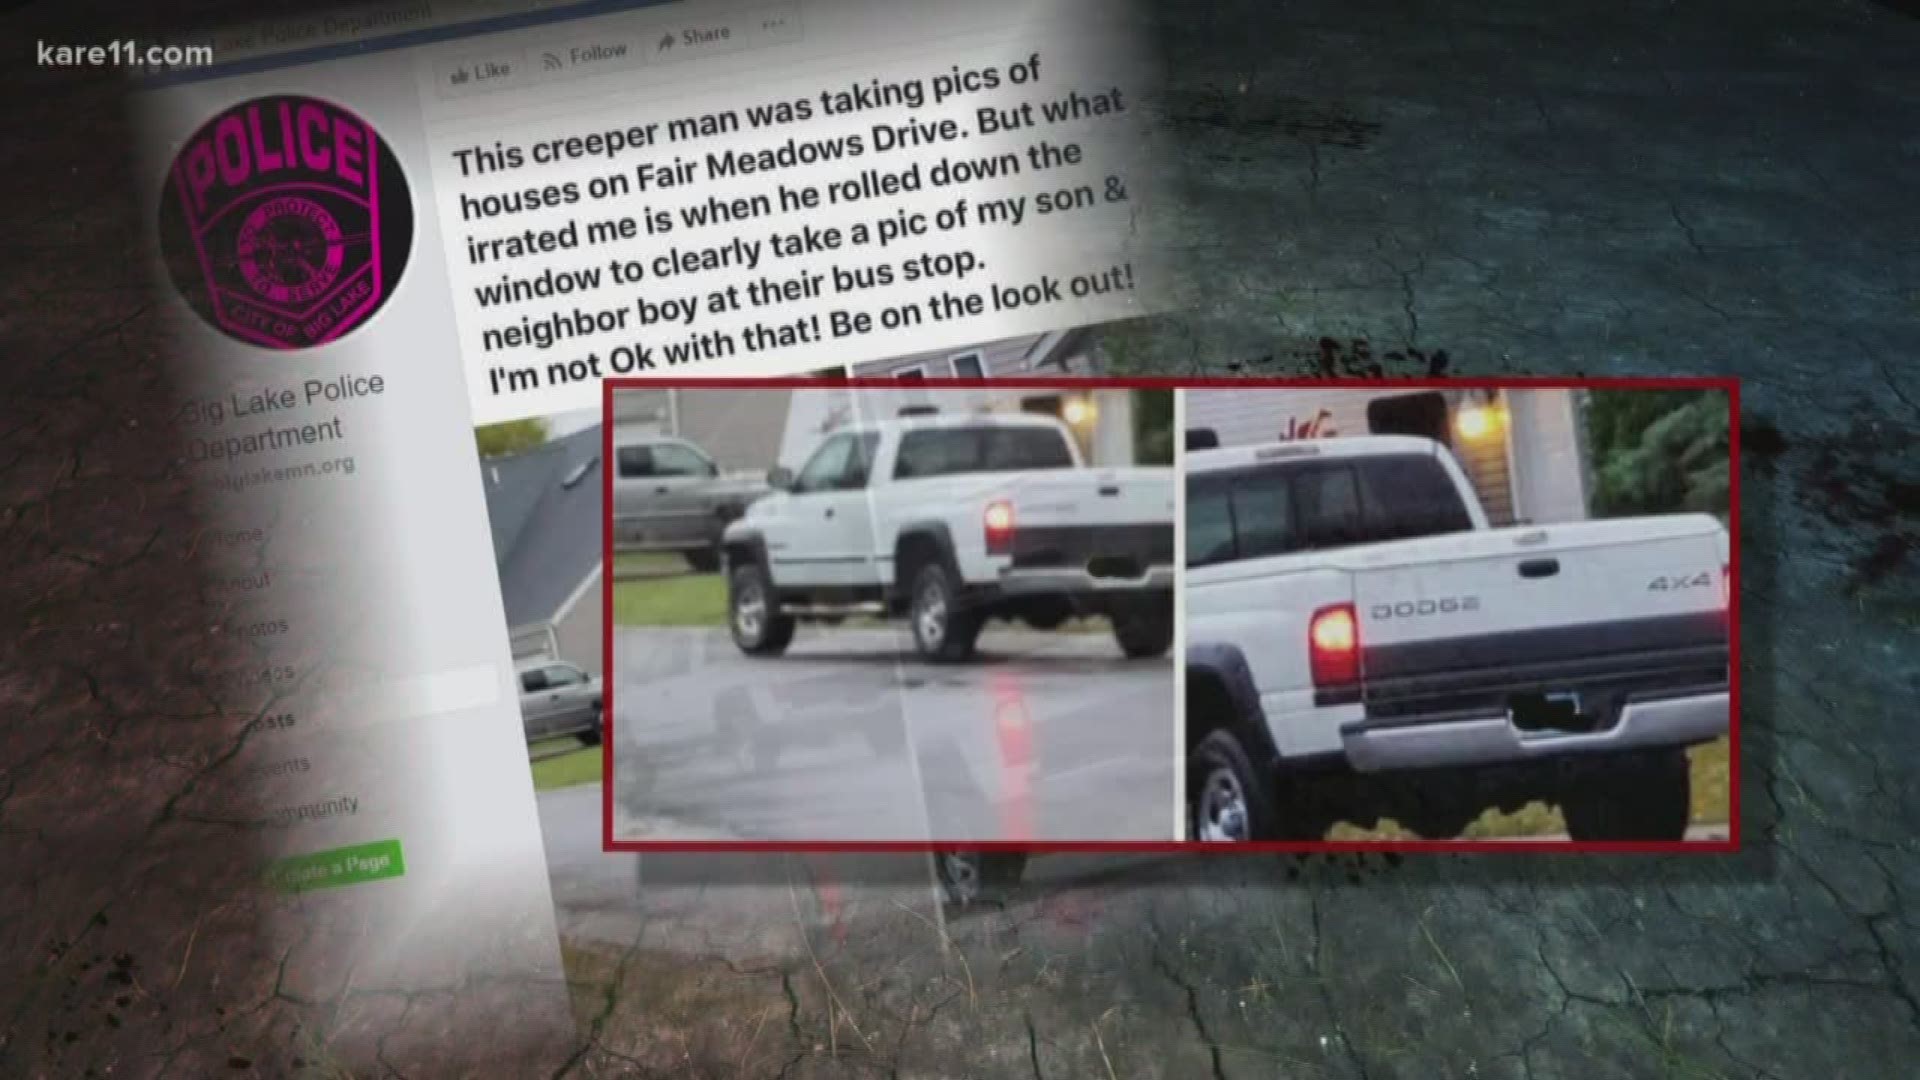 The man says the post has caused people to recognize his truck and call him names. He says he took a wrong turn and stopped to call his son for directions.